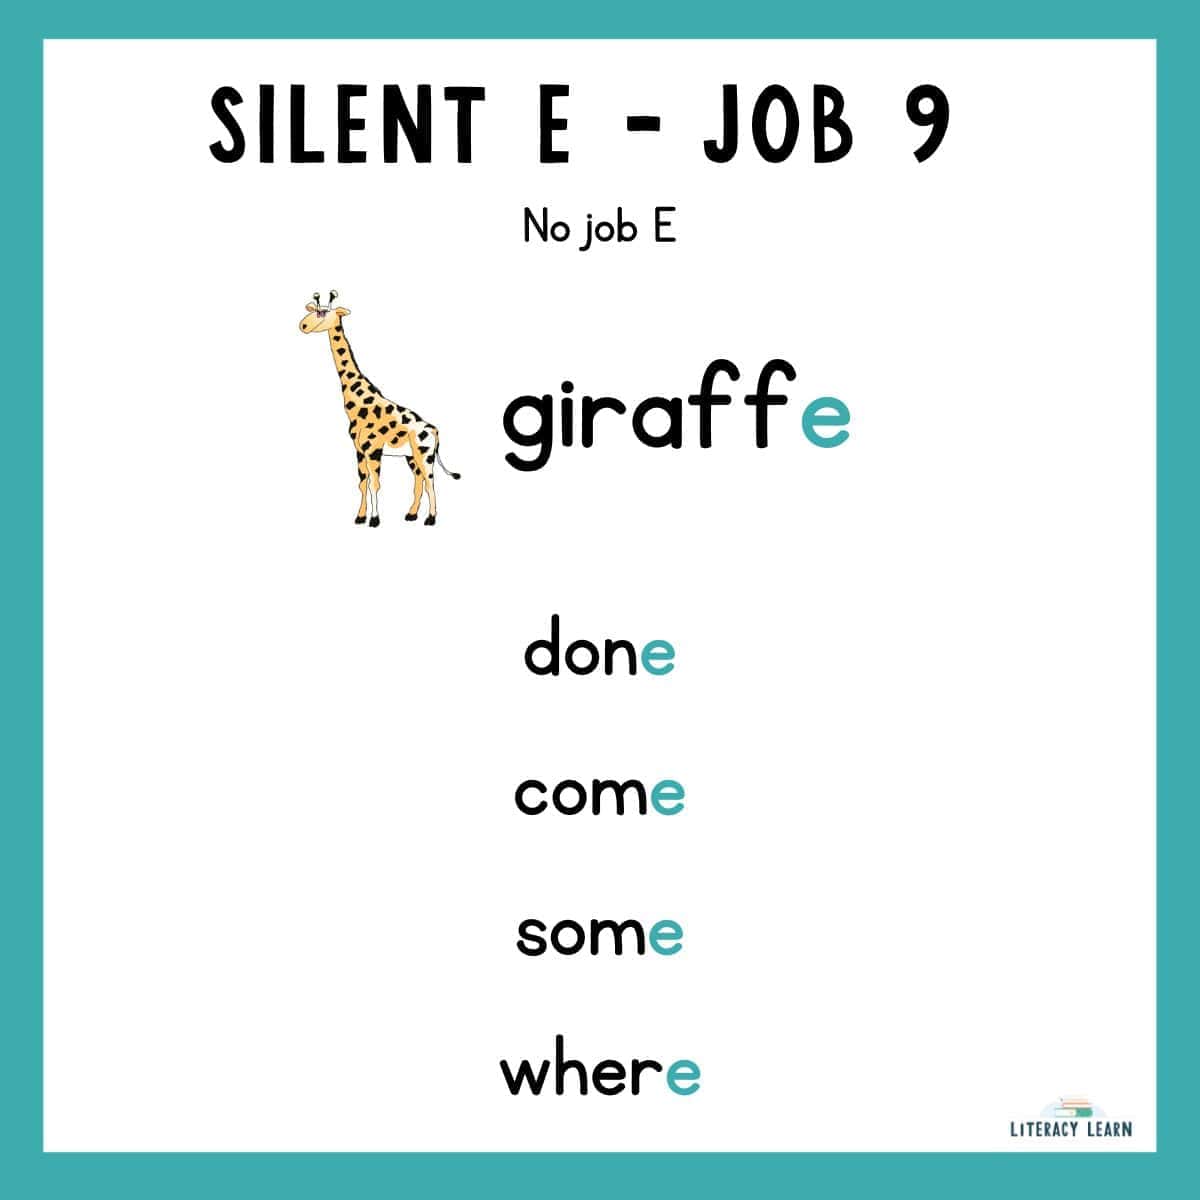 Turquoise graphic showing job 9 of the final silent E with words and examples.